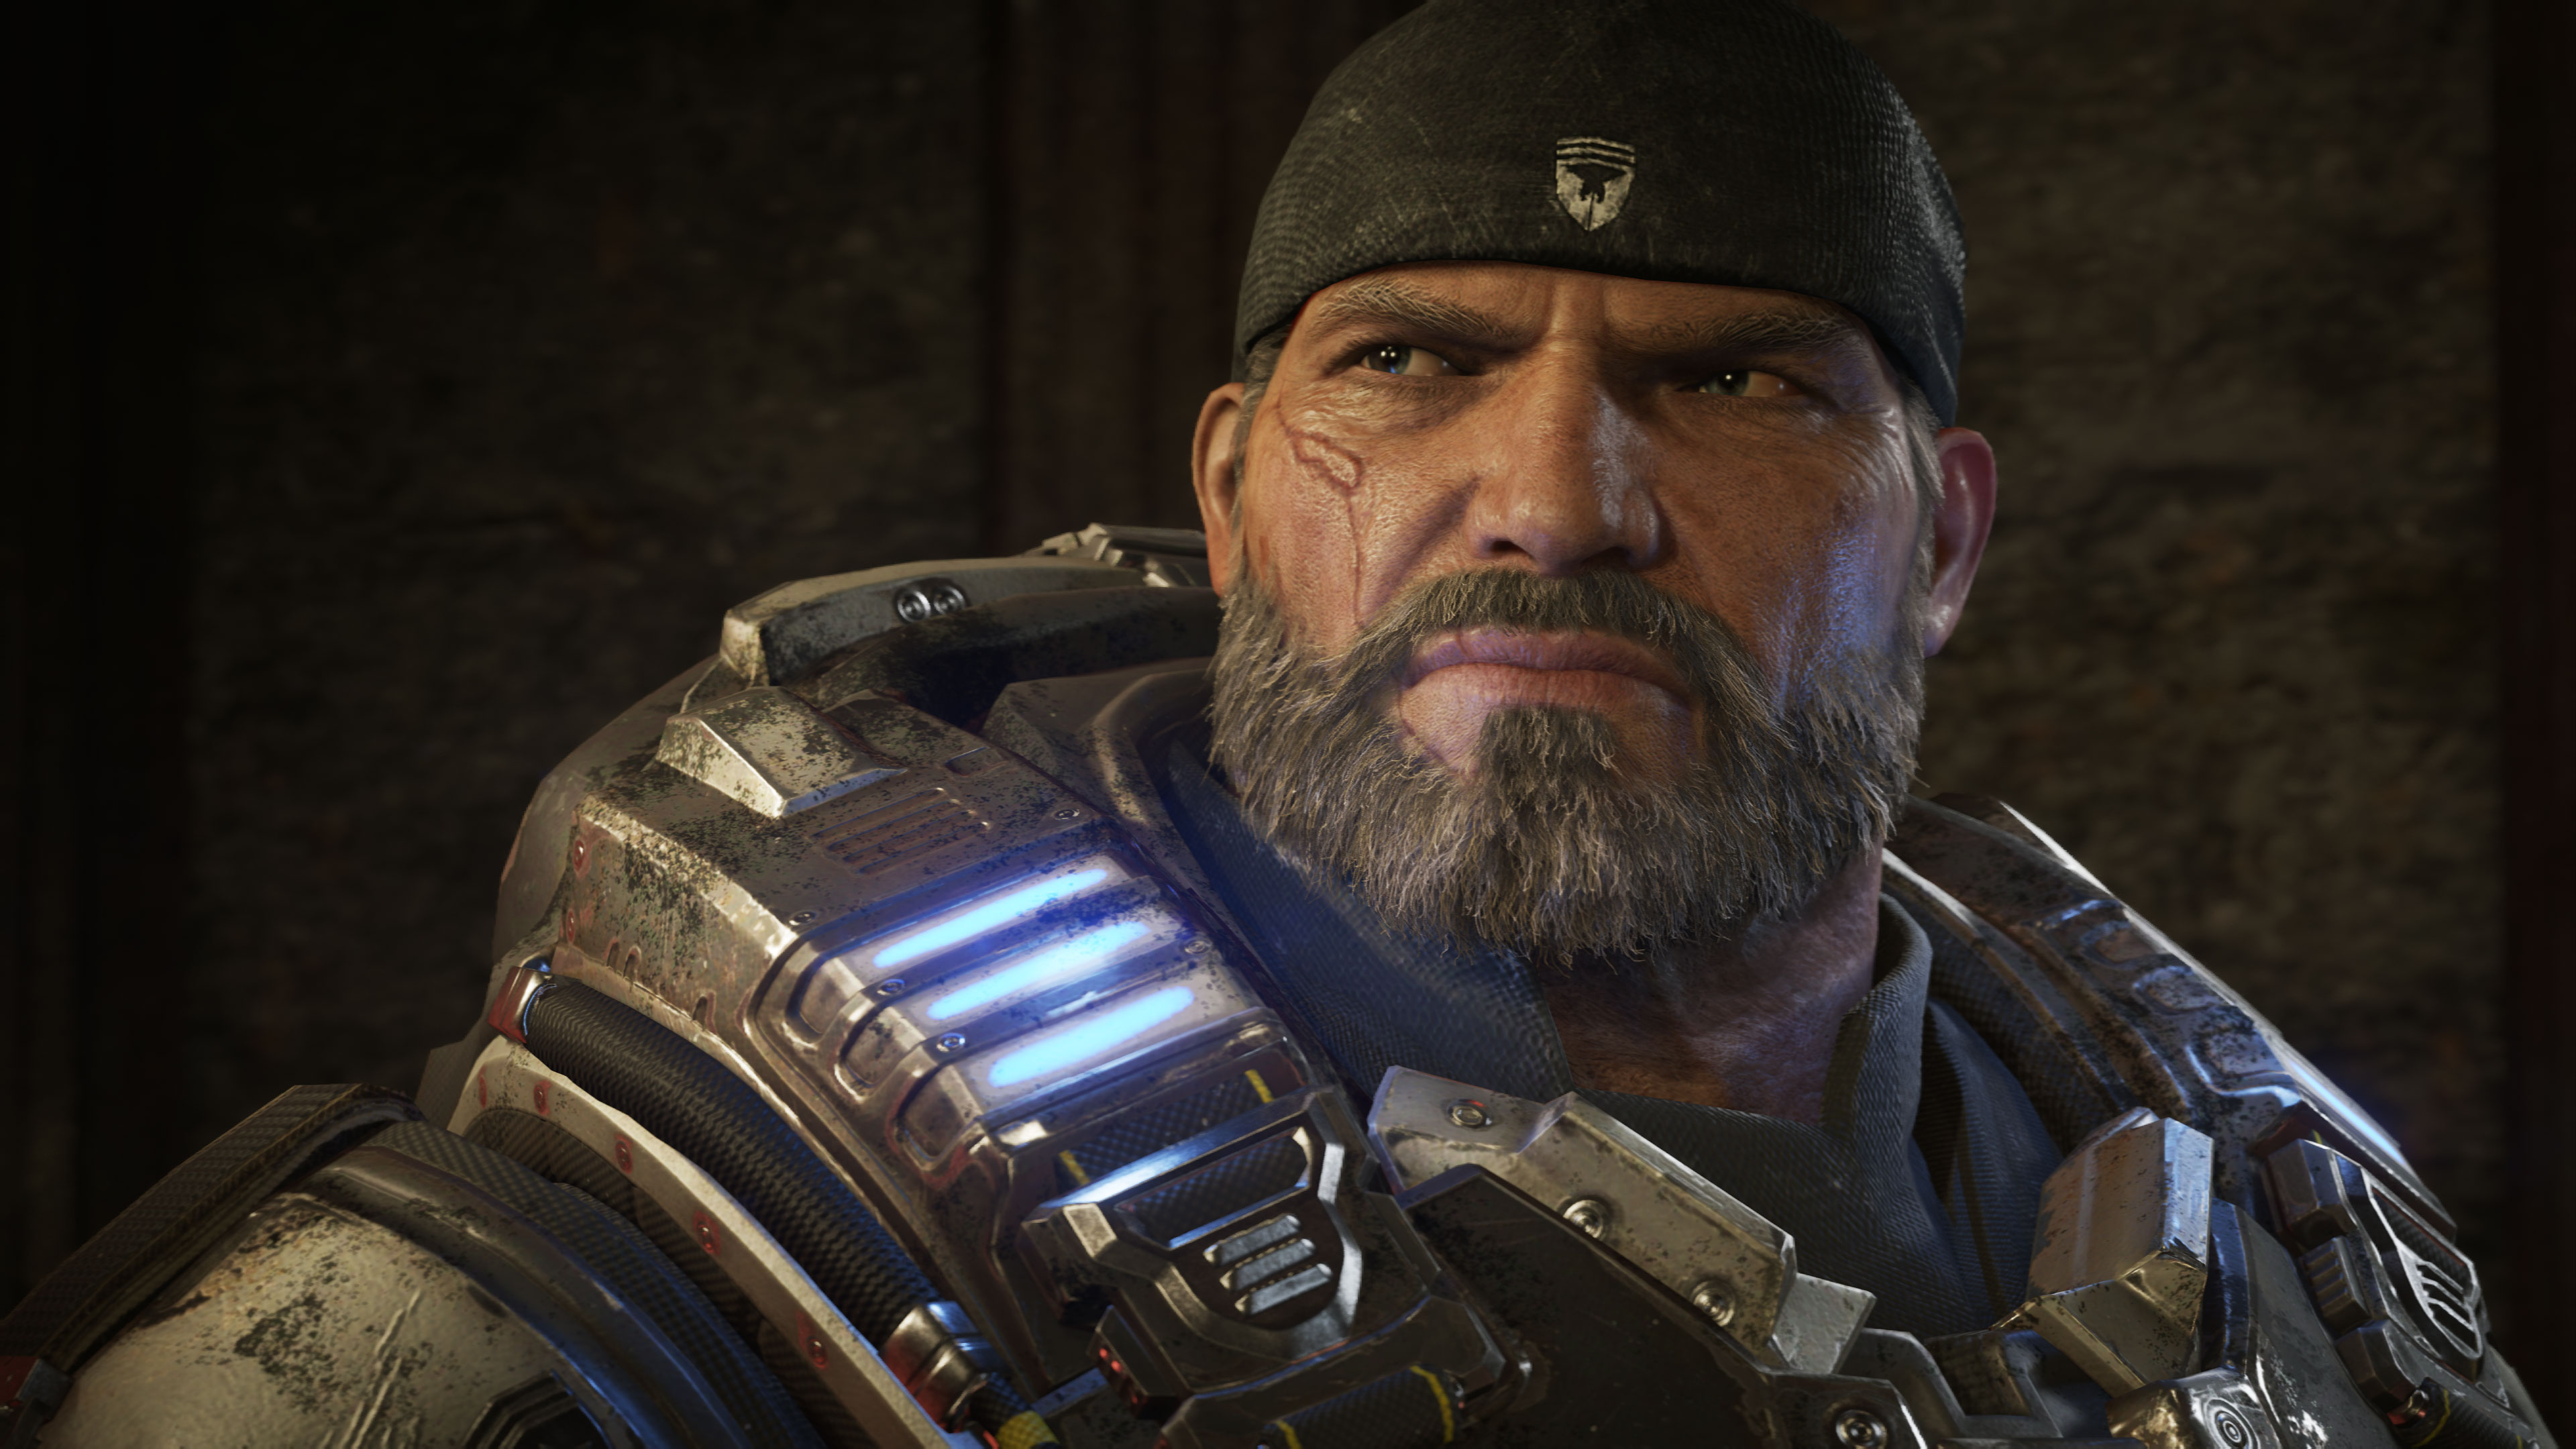 Gears of War 4's Horde mode is more intense than ever before